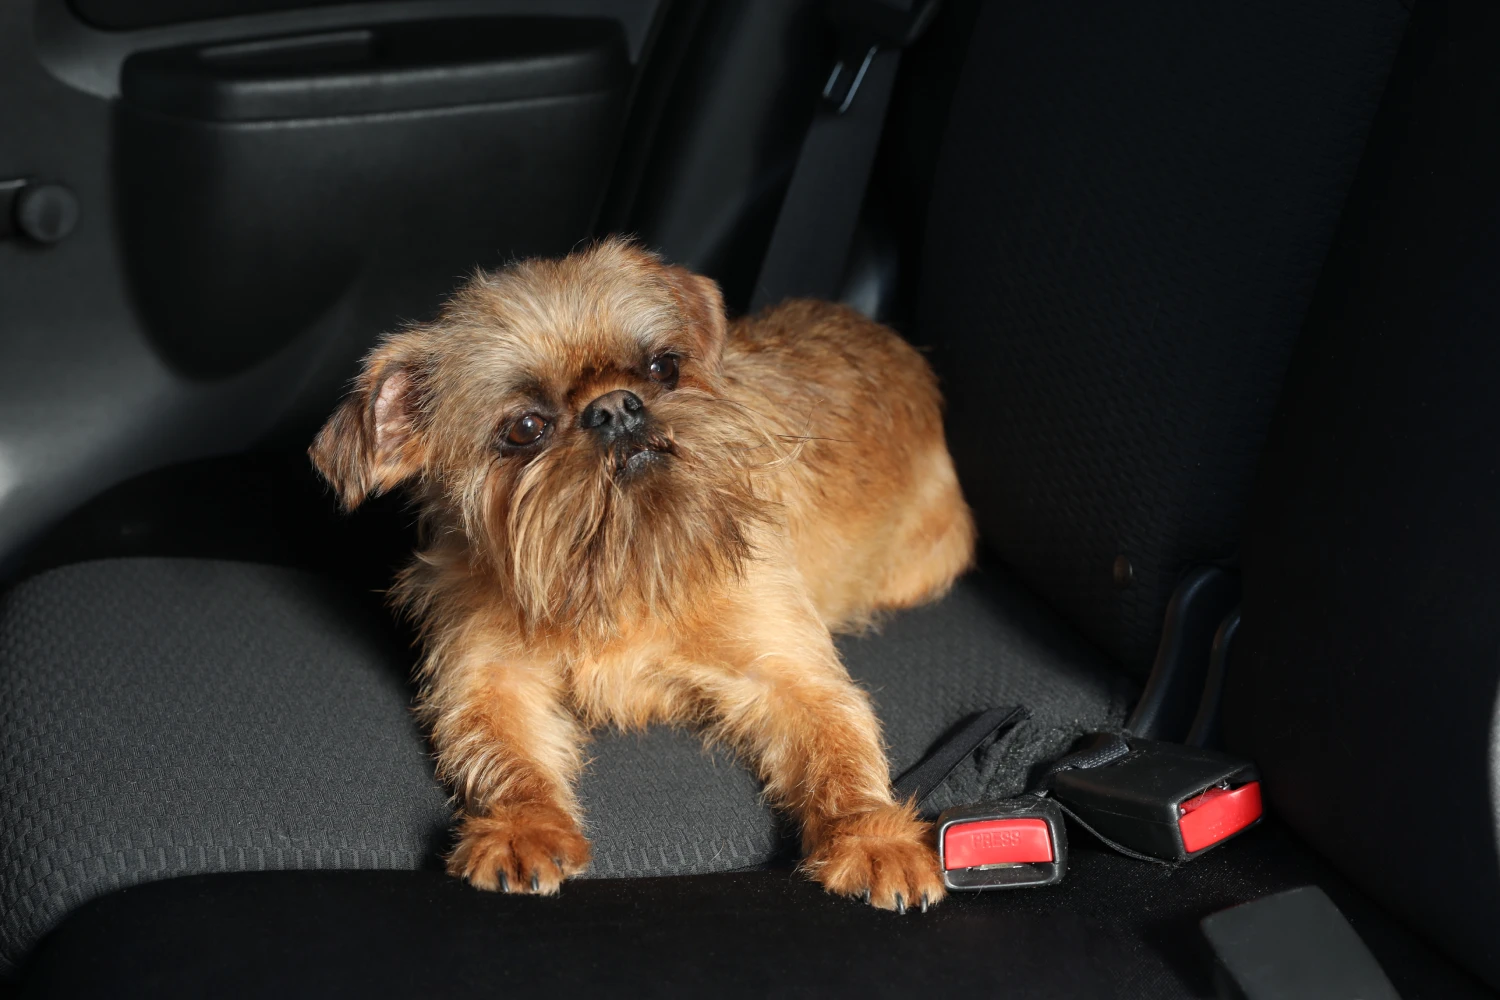 Kia Optima Dog Safety Belt for Brussels Griffons